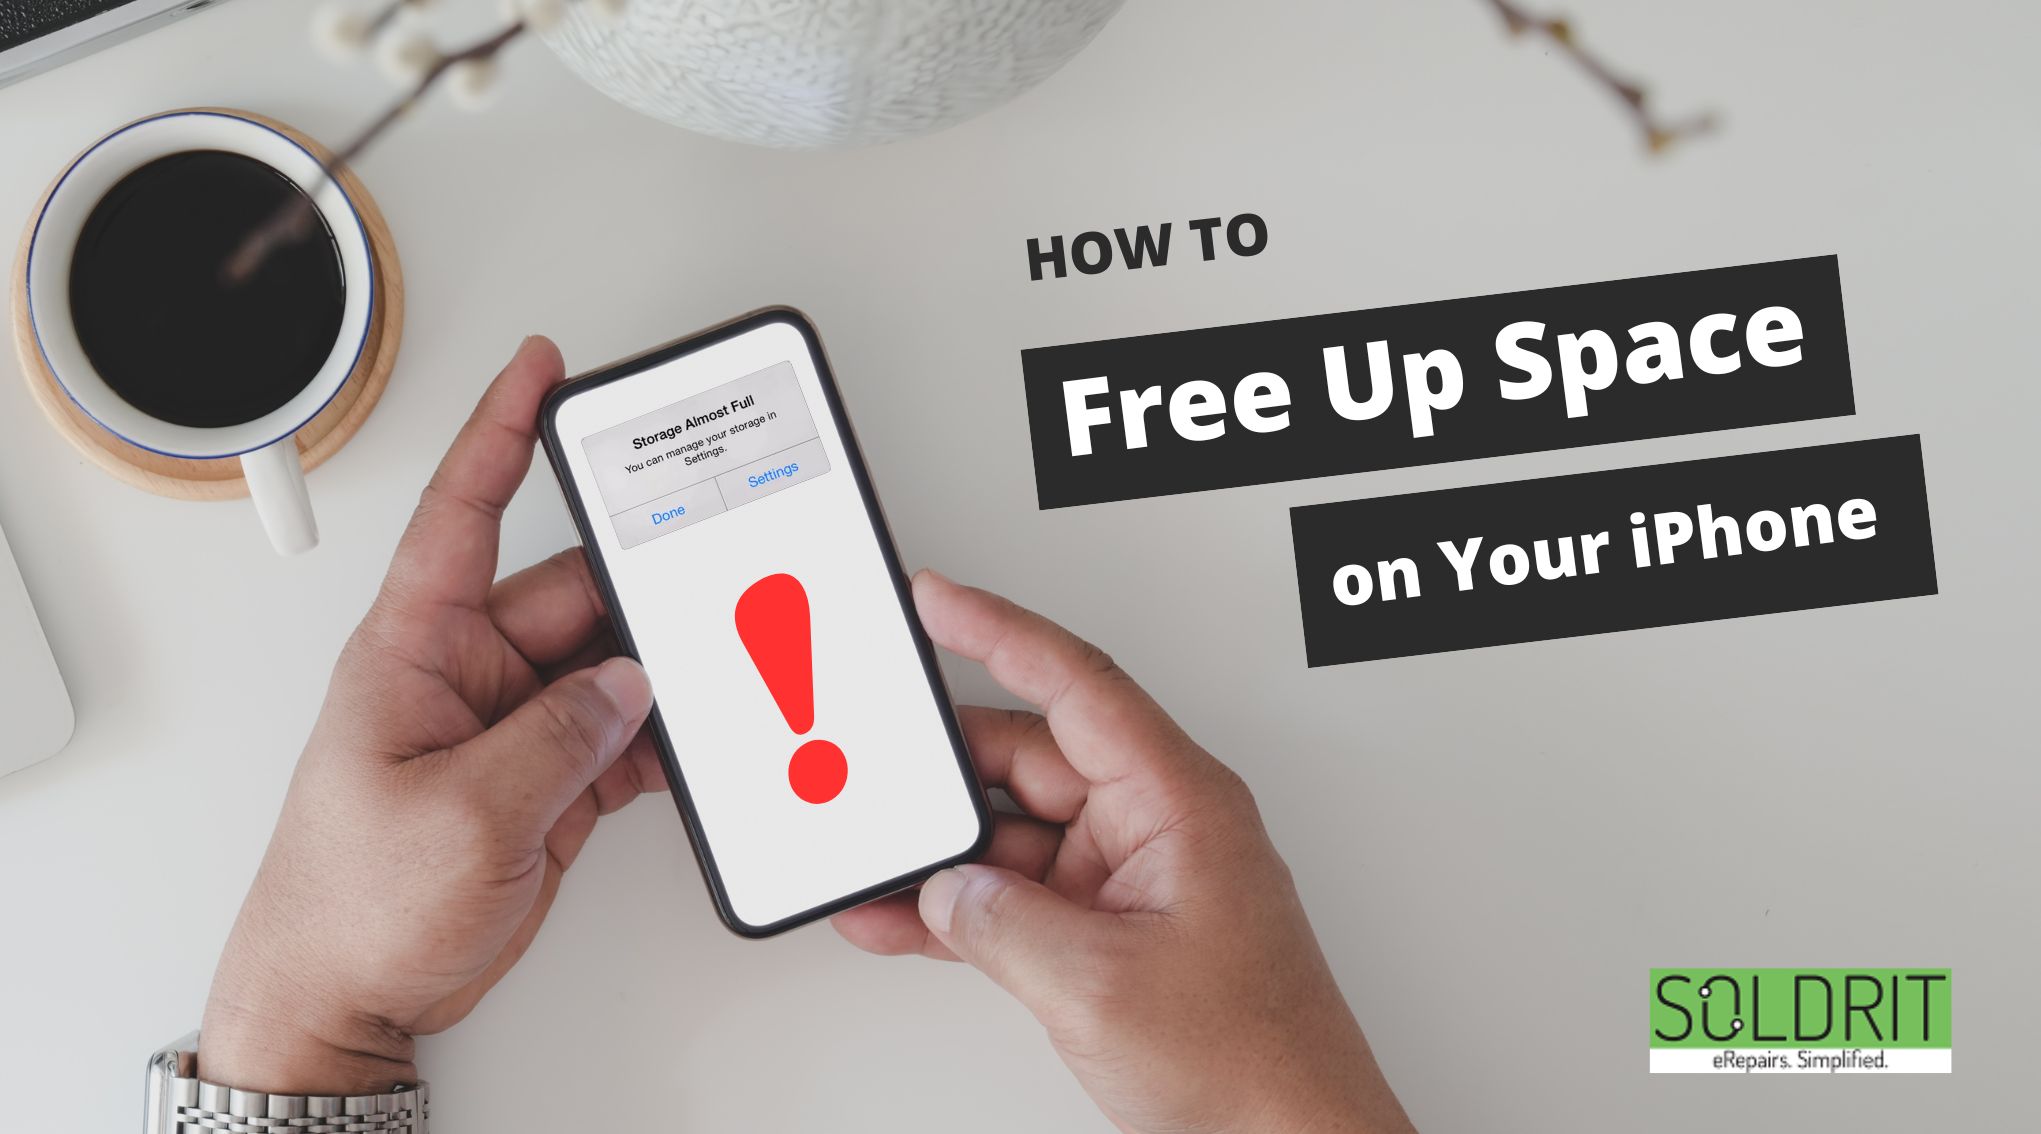 How to Free Up Space on Your iPhone